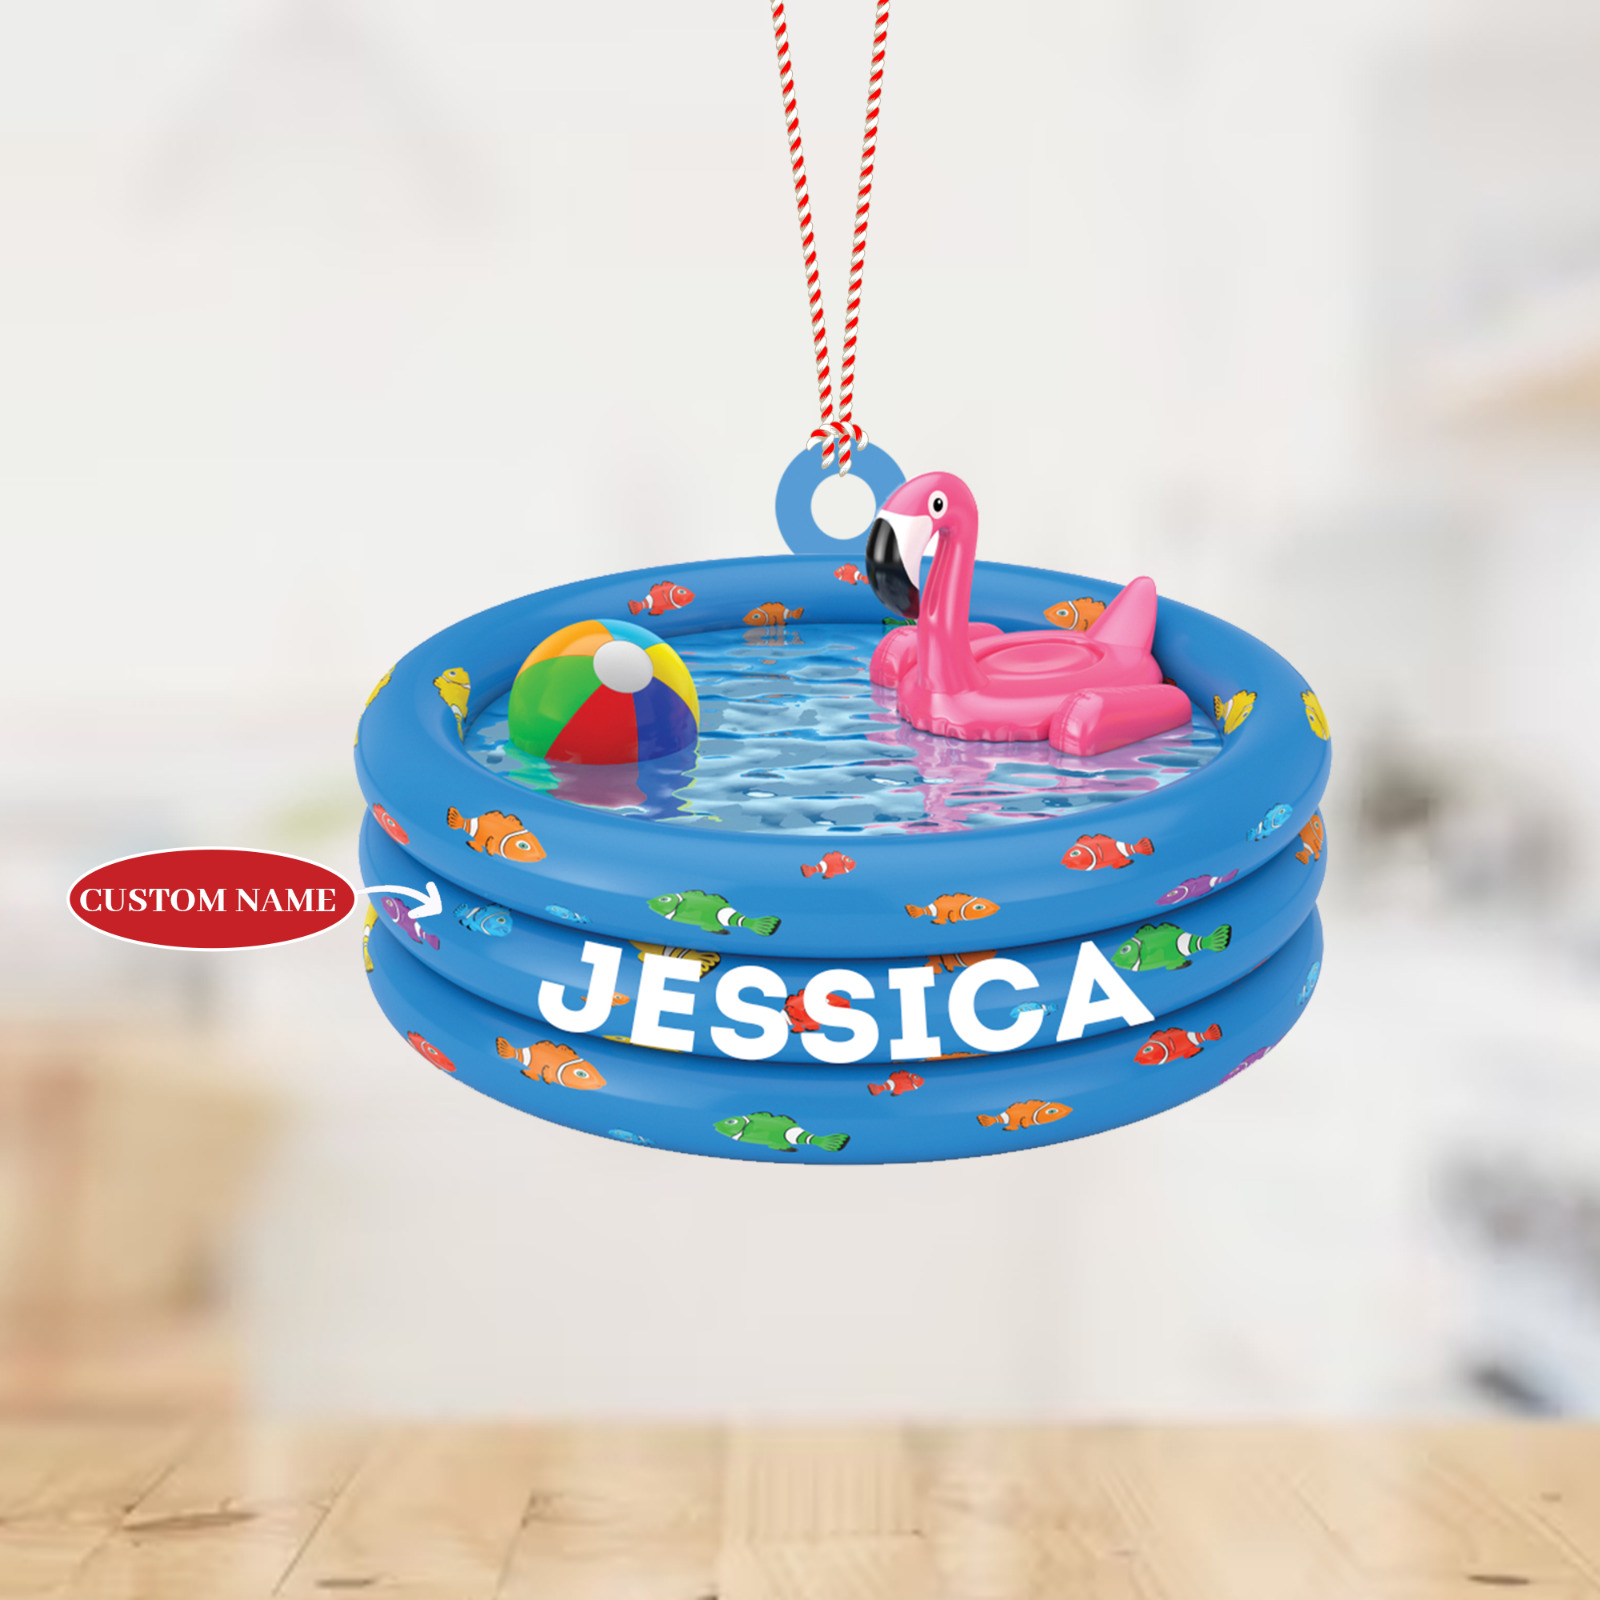 Personalized Swimming Pool Ornament, Pool Car Ornament, Pool Summer Ornament